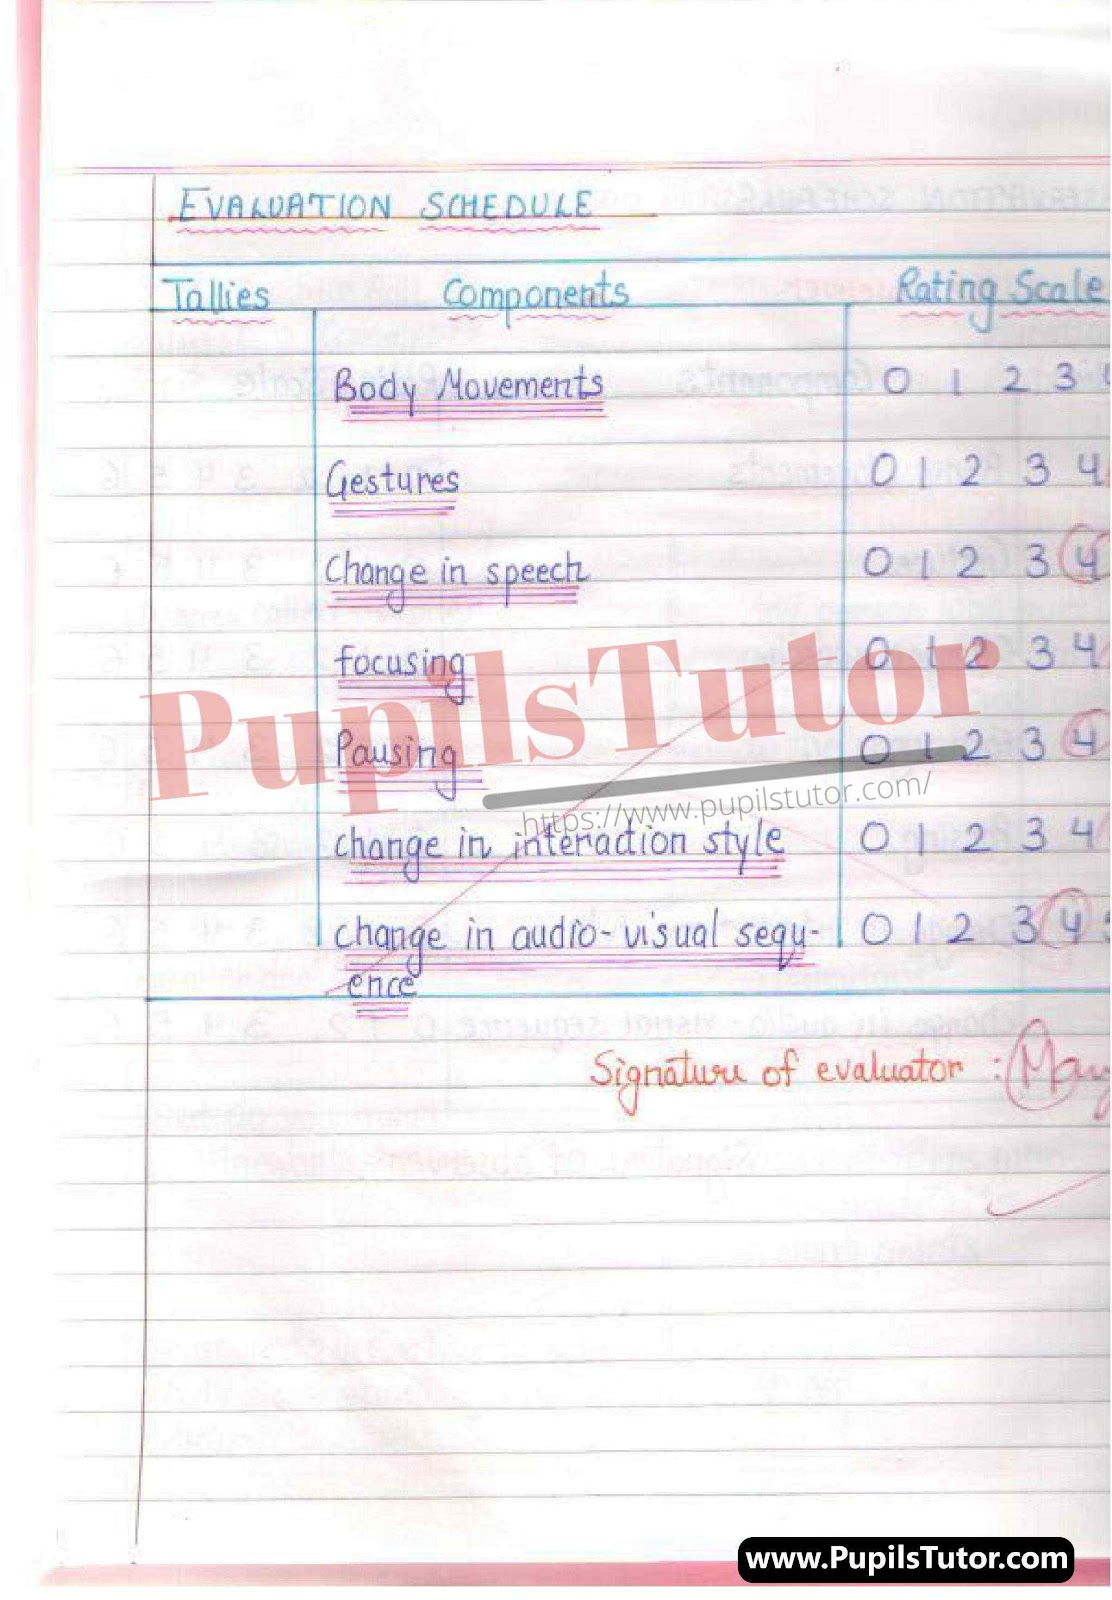 Class/Grade 11 And 12 Business Studies Microteaching Skill Of Questioning Lesson Plan On Retailer And Its Types For CBSE NCERT KVS School And University College Teachers – (Page And Image Number 3) – www.pupilstutor.com